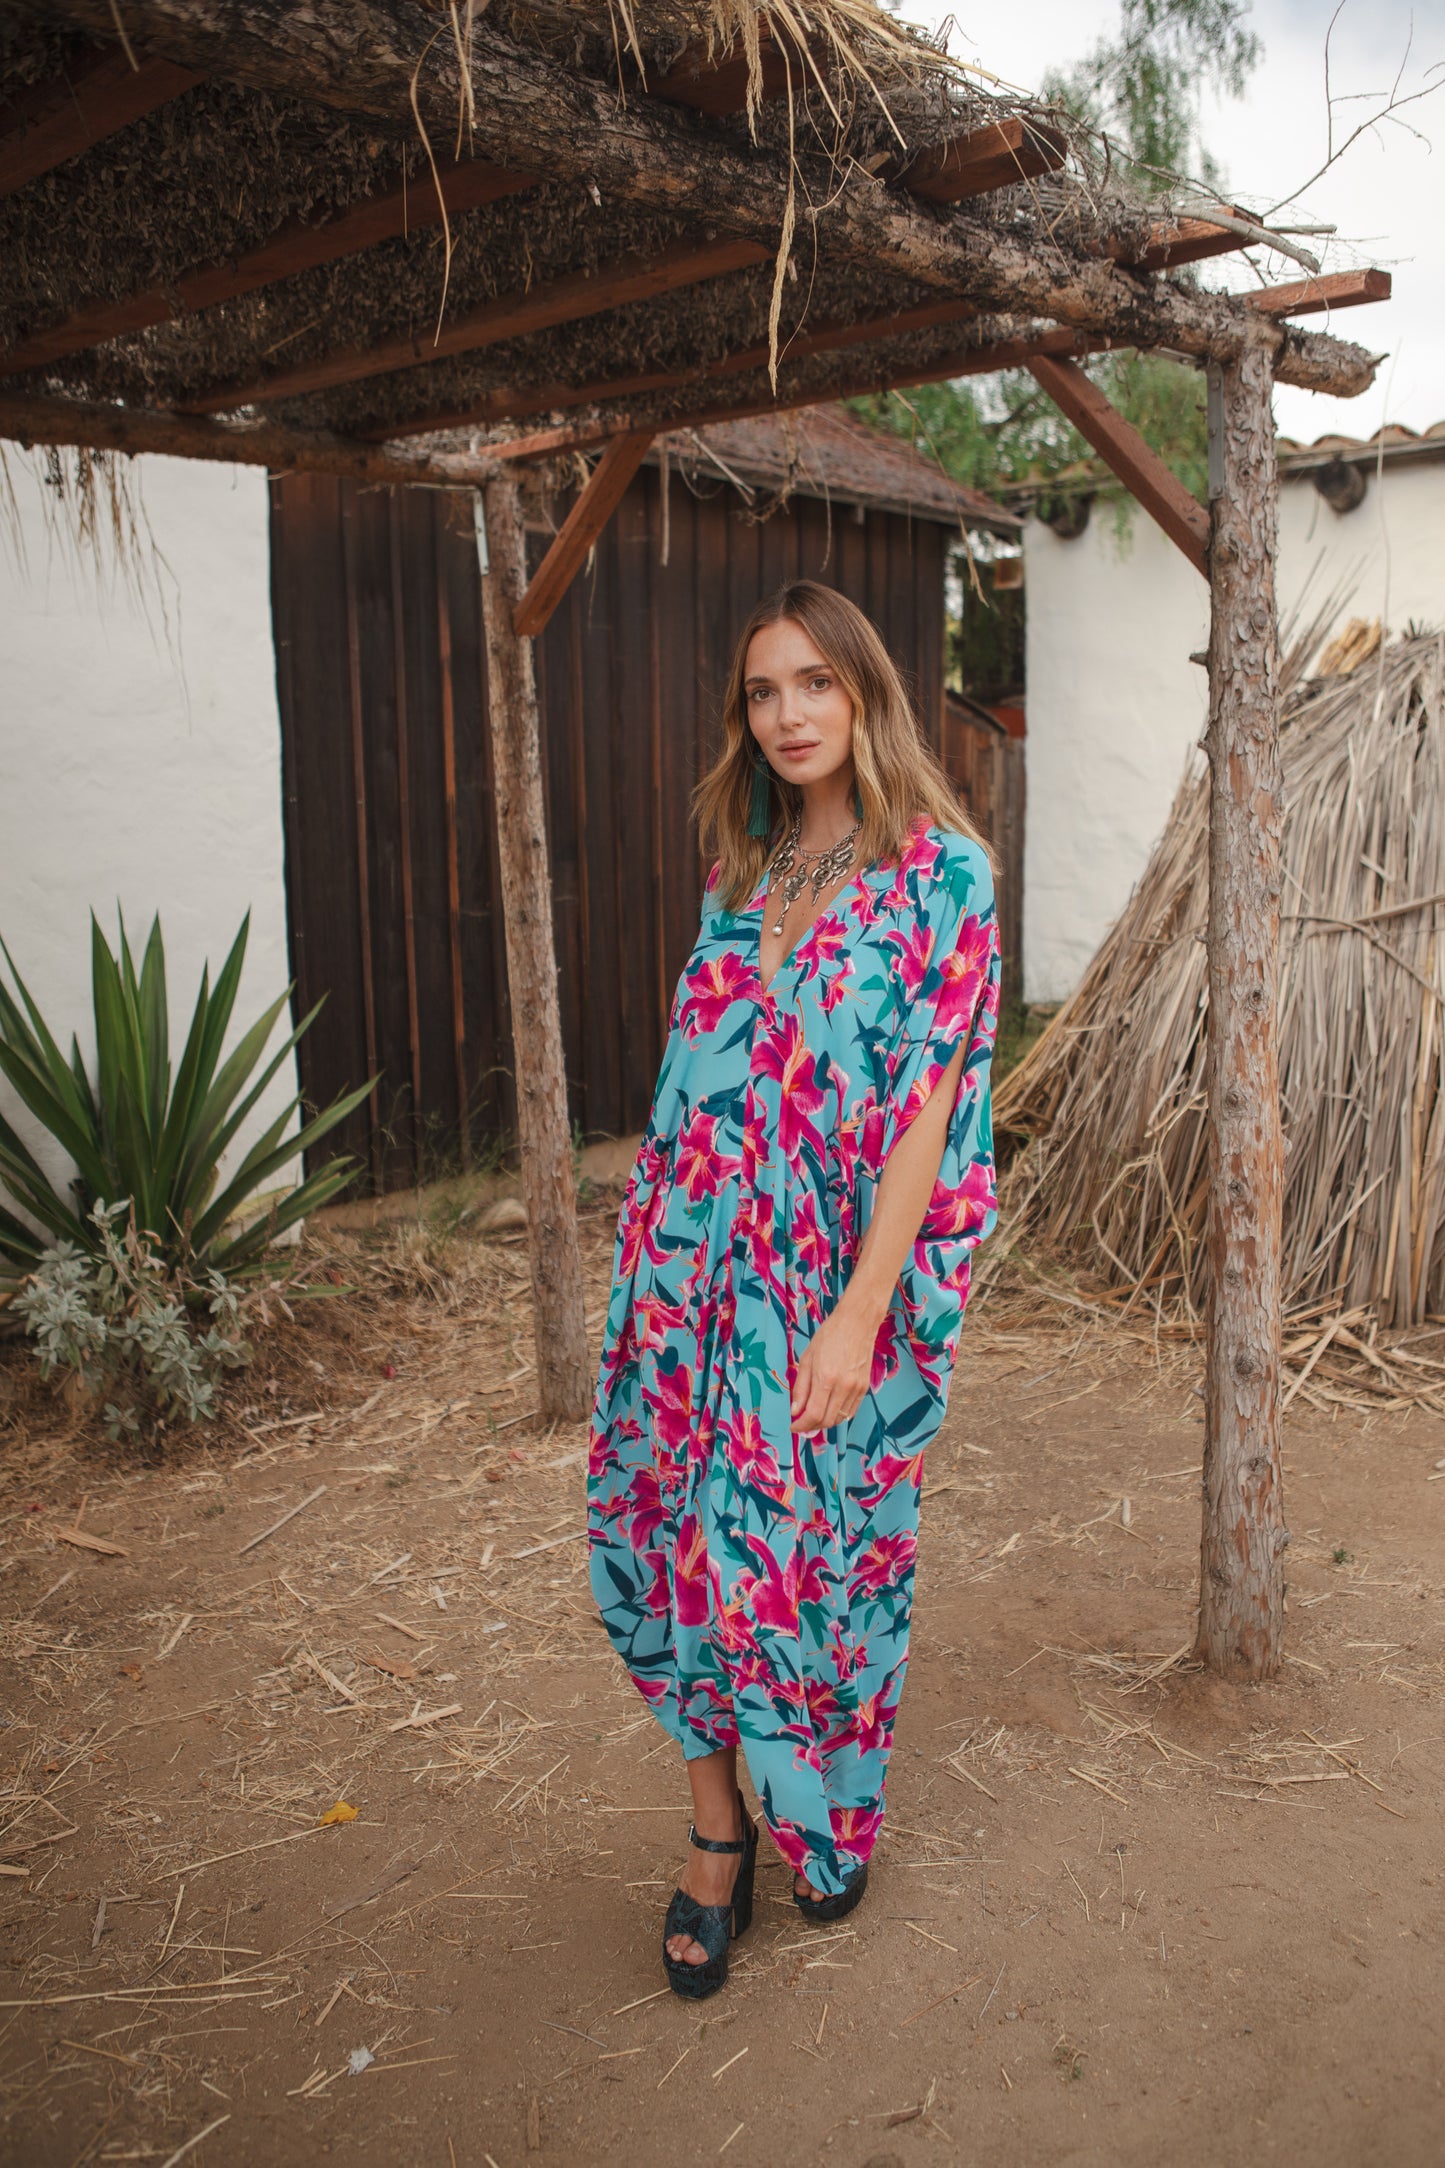 Light aqua blue caftan with fuchsia hot pink floral stargazer lily print and dark green leaves, vibrant colorful kaftan with deep v and short batwing sleeves, bohemian style